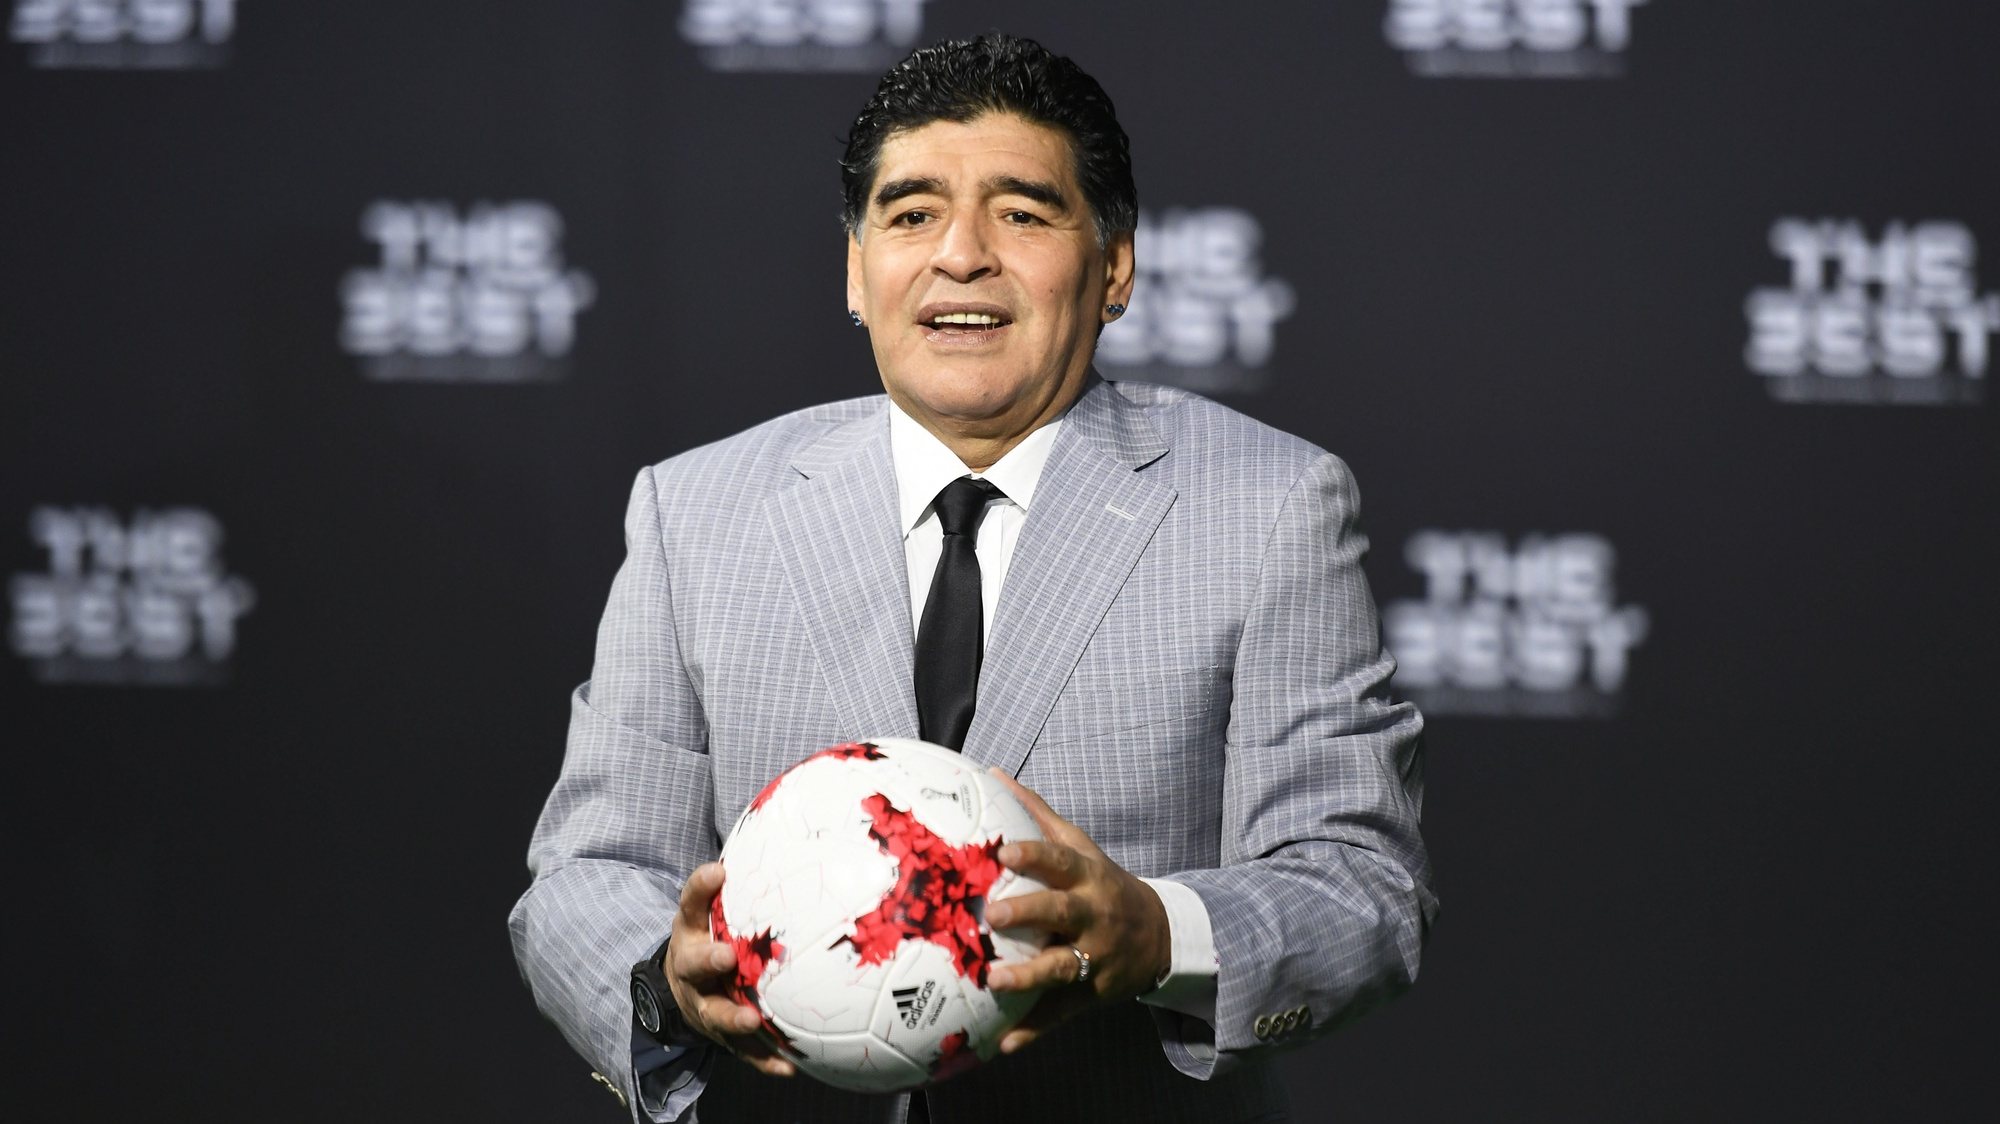 epa08841528 (FILE) - Argentinian soccer legend Diego Armando Maradona poses for photographers as he arrives prior to the FIFA Awards 2016 gala at the Swiss TV studio in Zurich, Switzerland, 09 January 2017 (re-issued on 25 November 2020). Diego Maradona has died after a heart attack, media reports claimed on 25 November 2020.  EPA/WALTER BIERI *** Local Caption *** 53218238